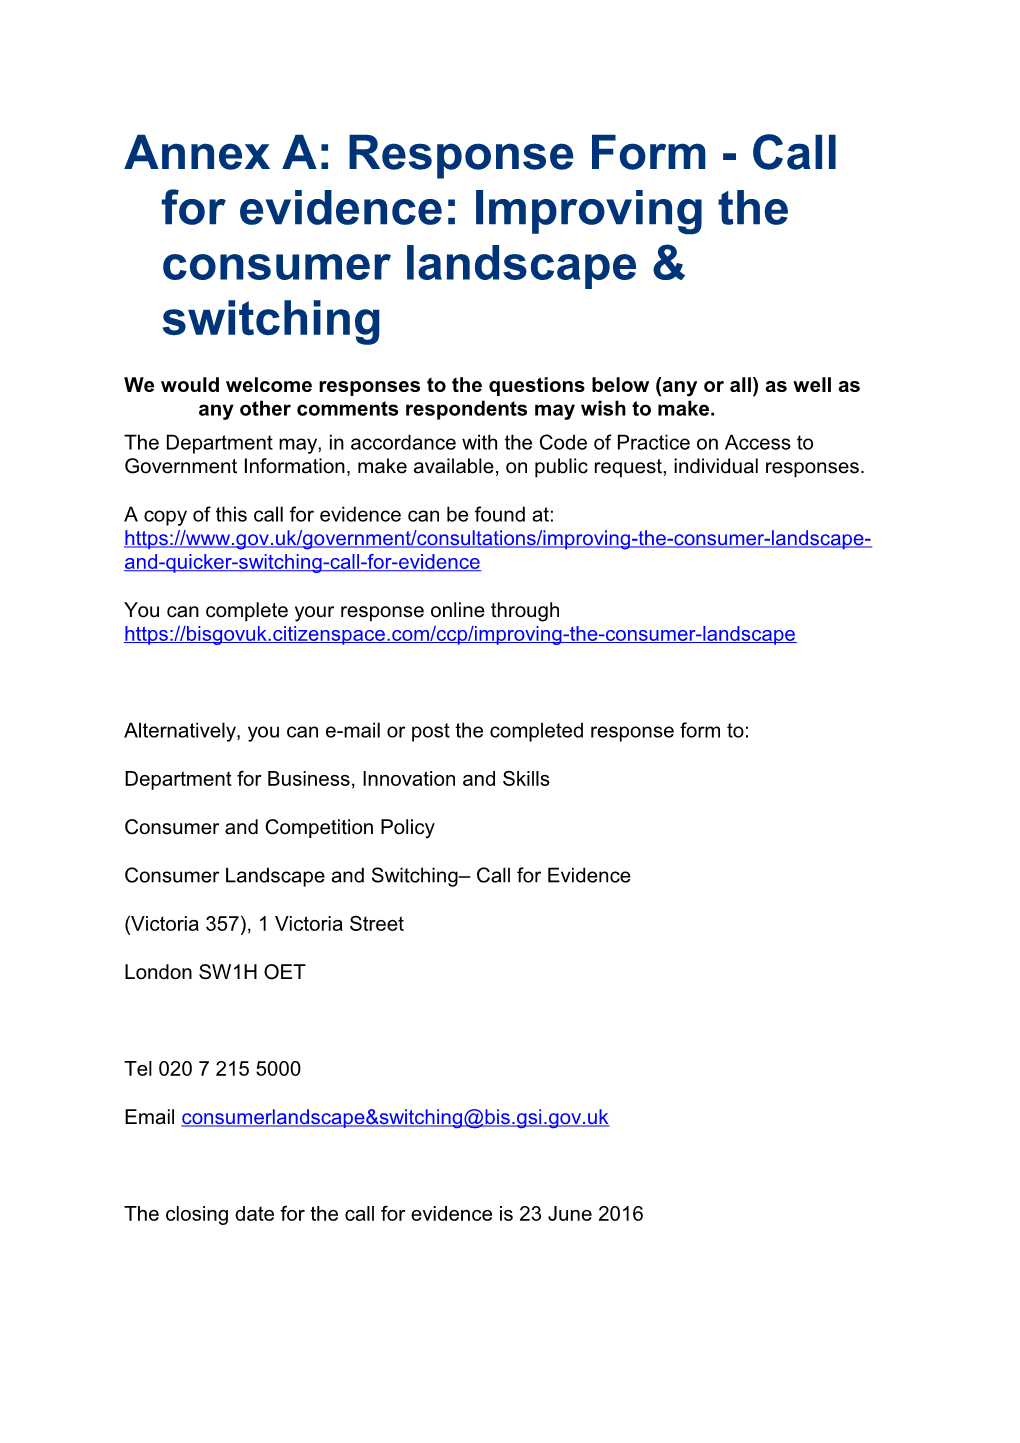 Response Form - Call for Evidence: Improving the Consumer Landscape & Switching